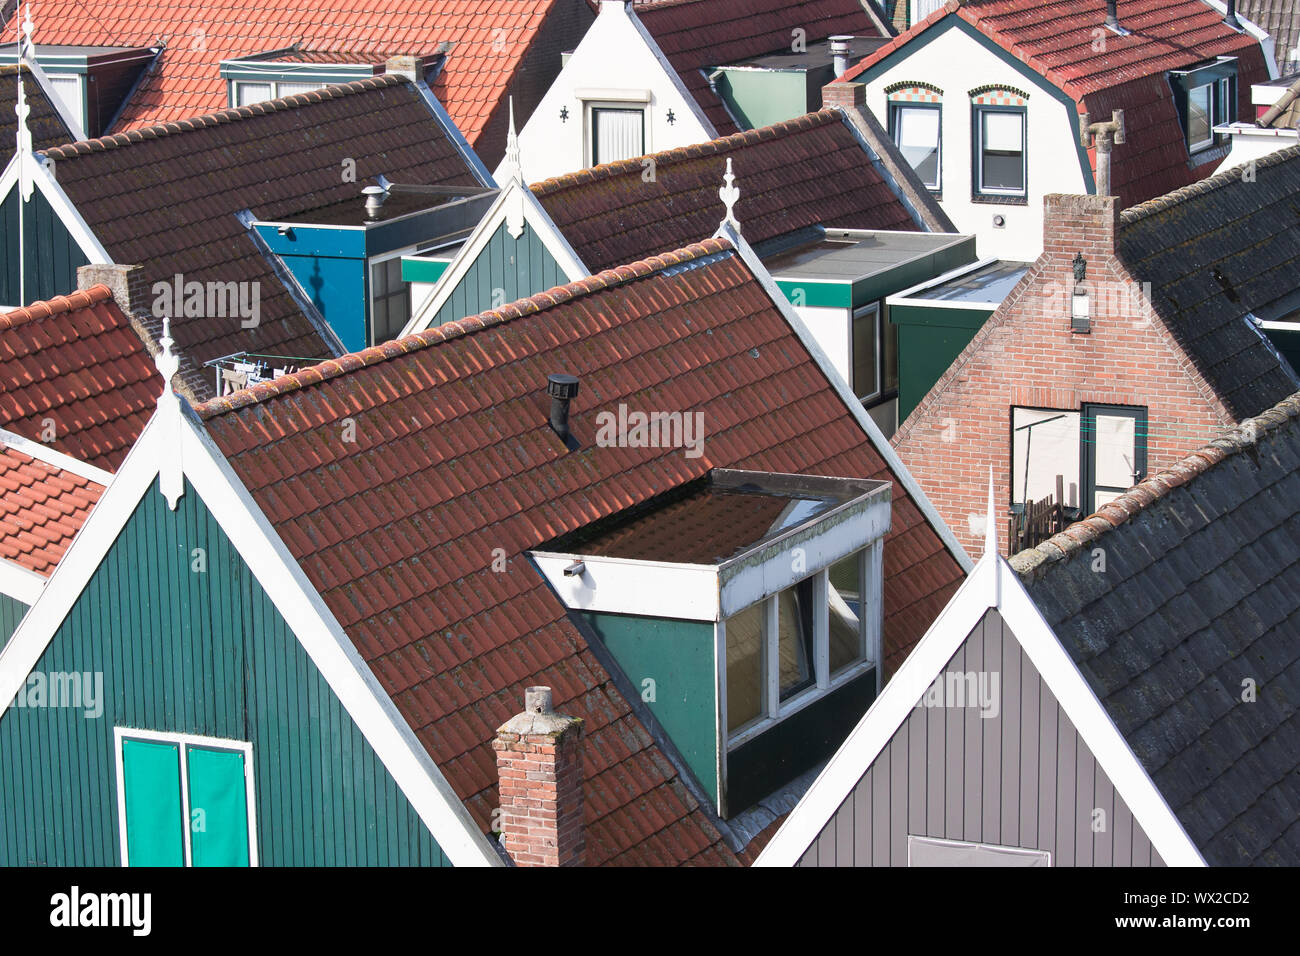 Facing the roofs of an old pittoresk village in the netherlands Stock Photo